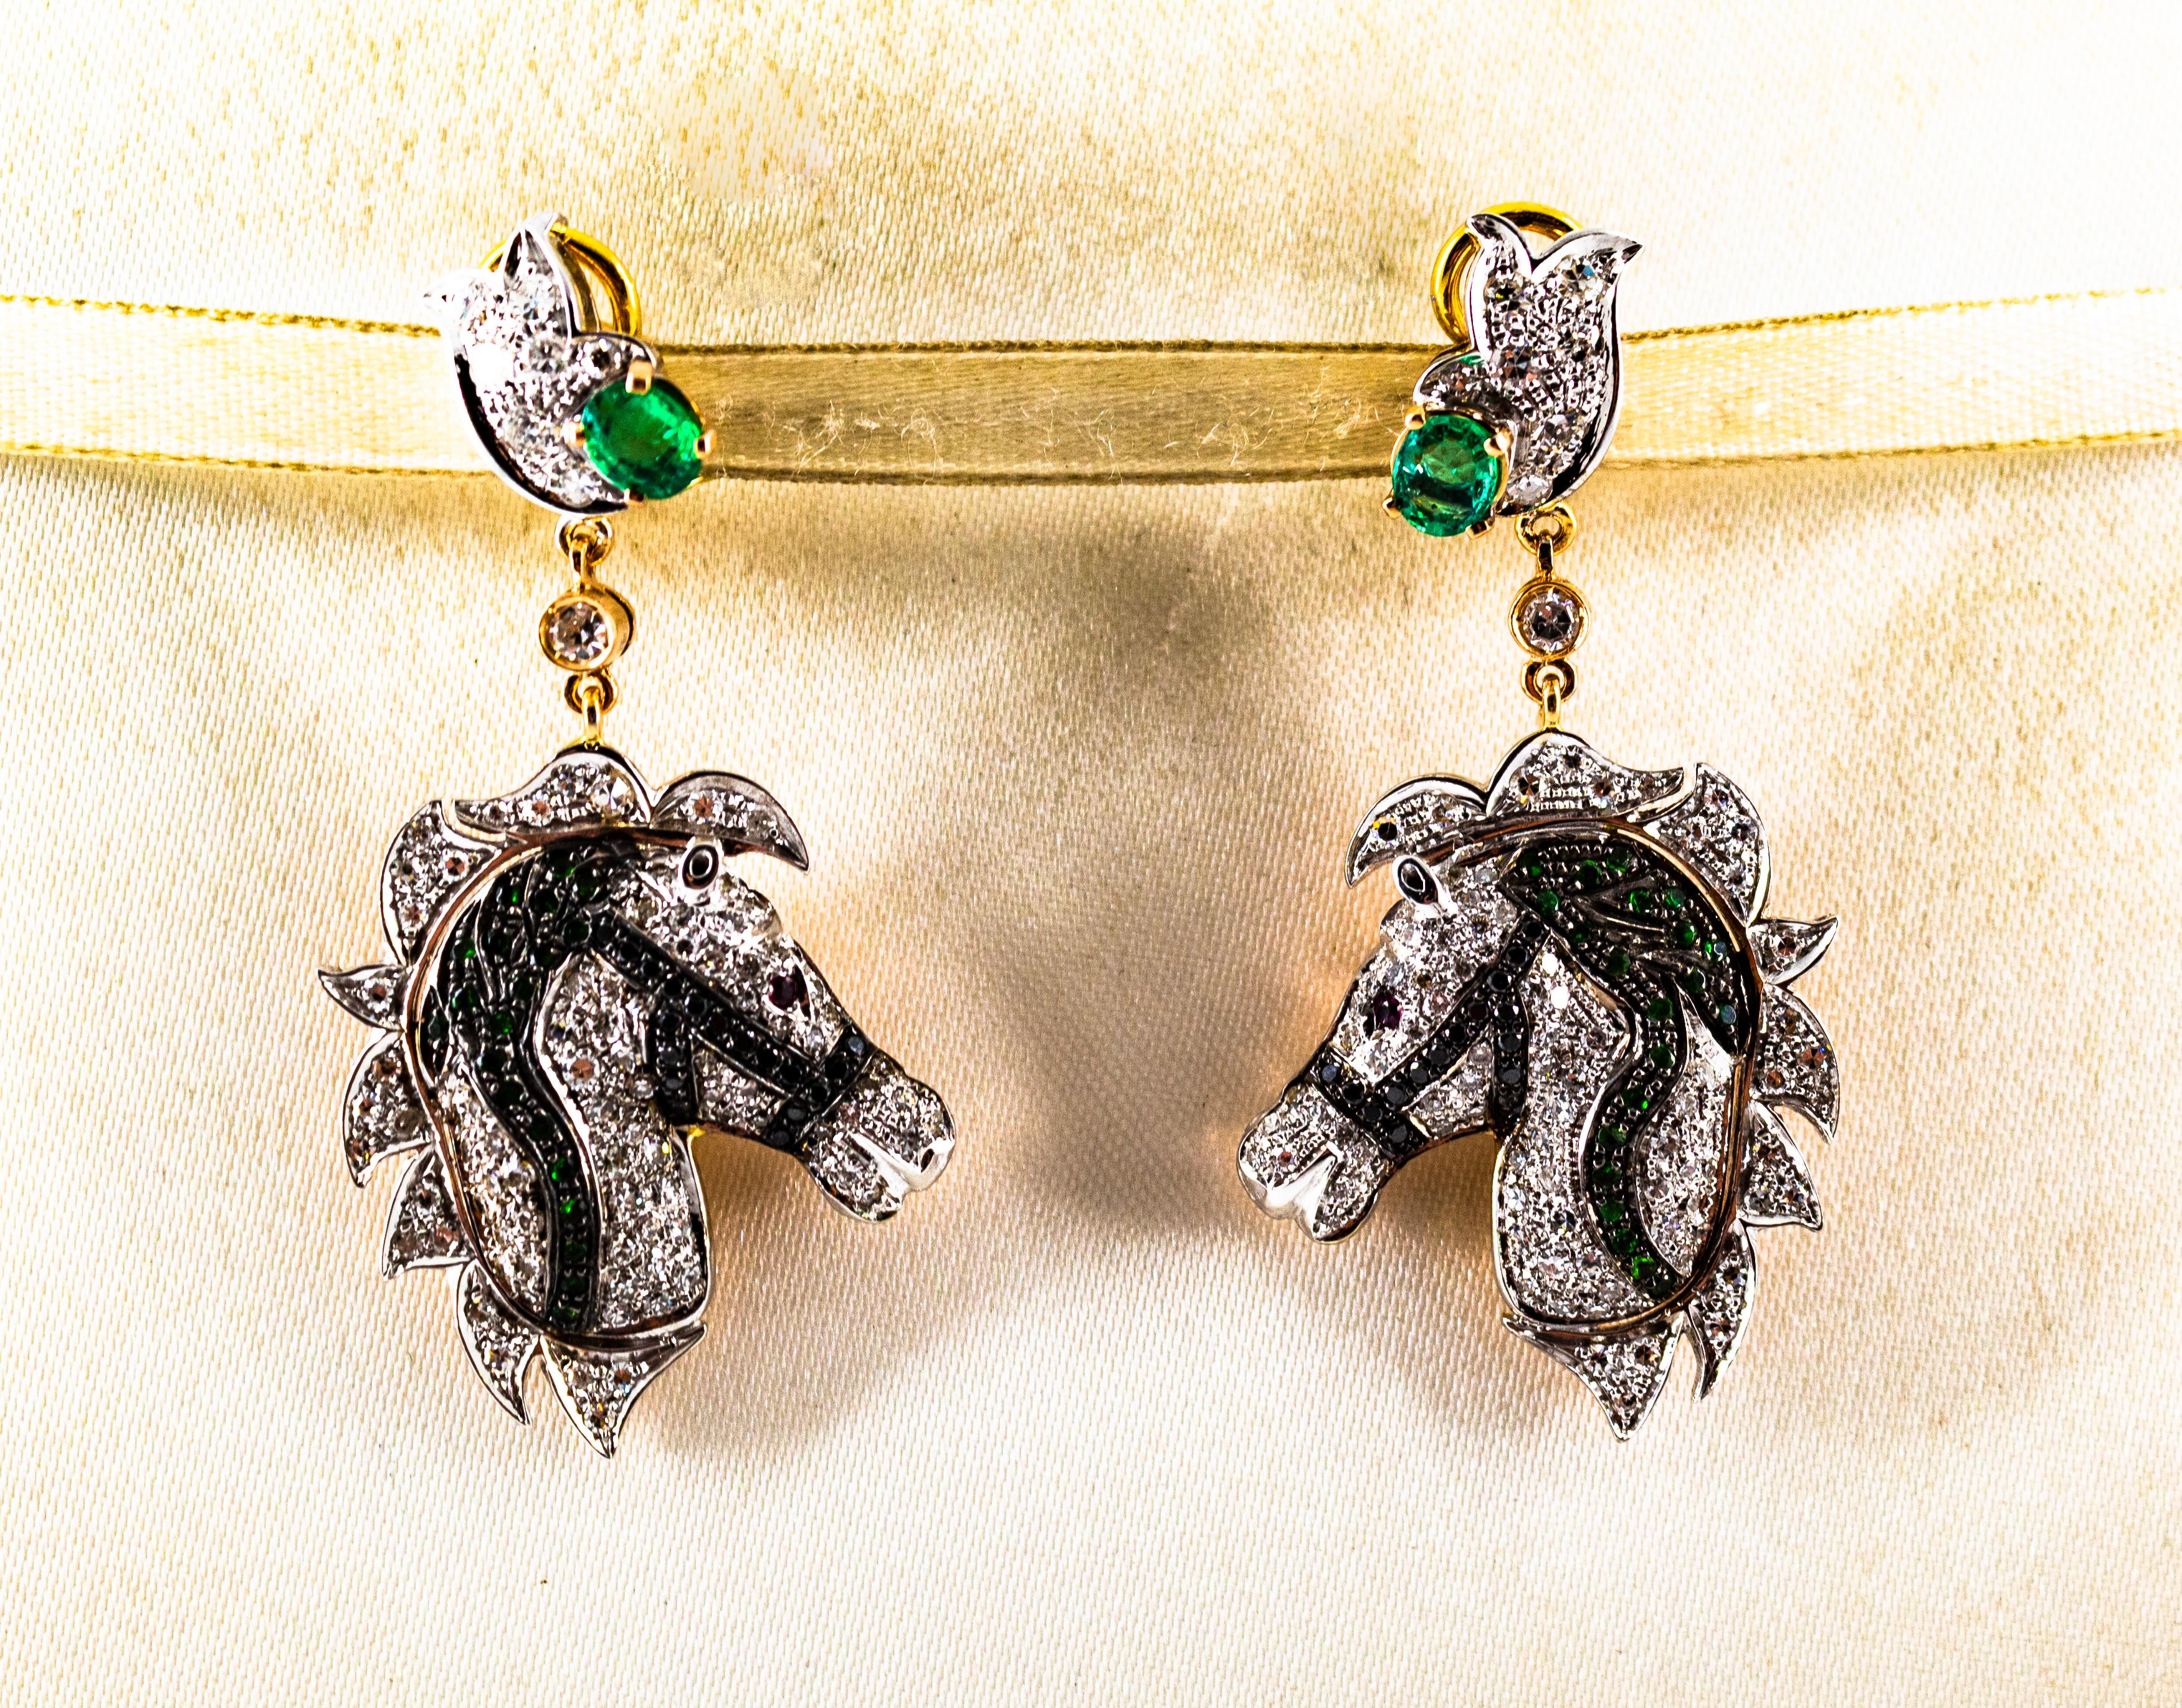 These Earrings are made of 14K Yellow Gold.
These Earrings have 1.80 Carats of White Diamonds.
These Earrings have 0.20 Carats of Black Diamonds.
These Earrings have 0.60 Carats of Emeralds.
These Earrings have 0.04 Carats of Rubies.
These Earrings